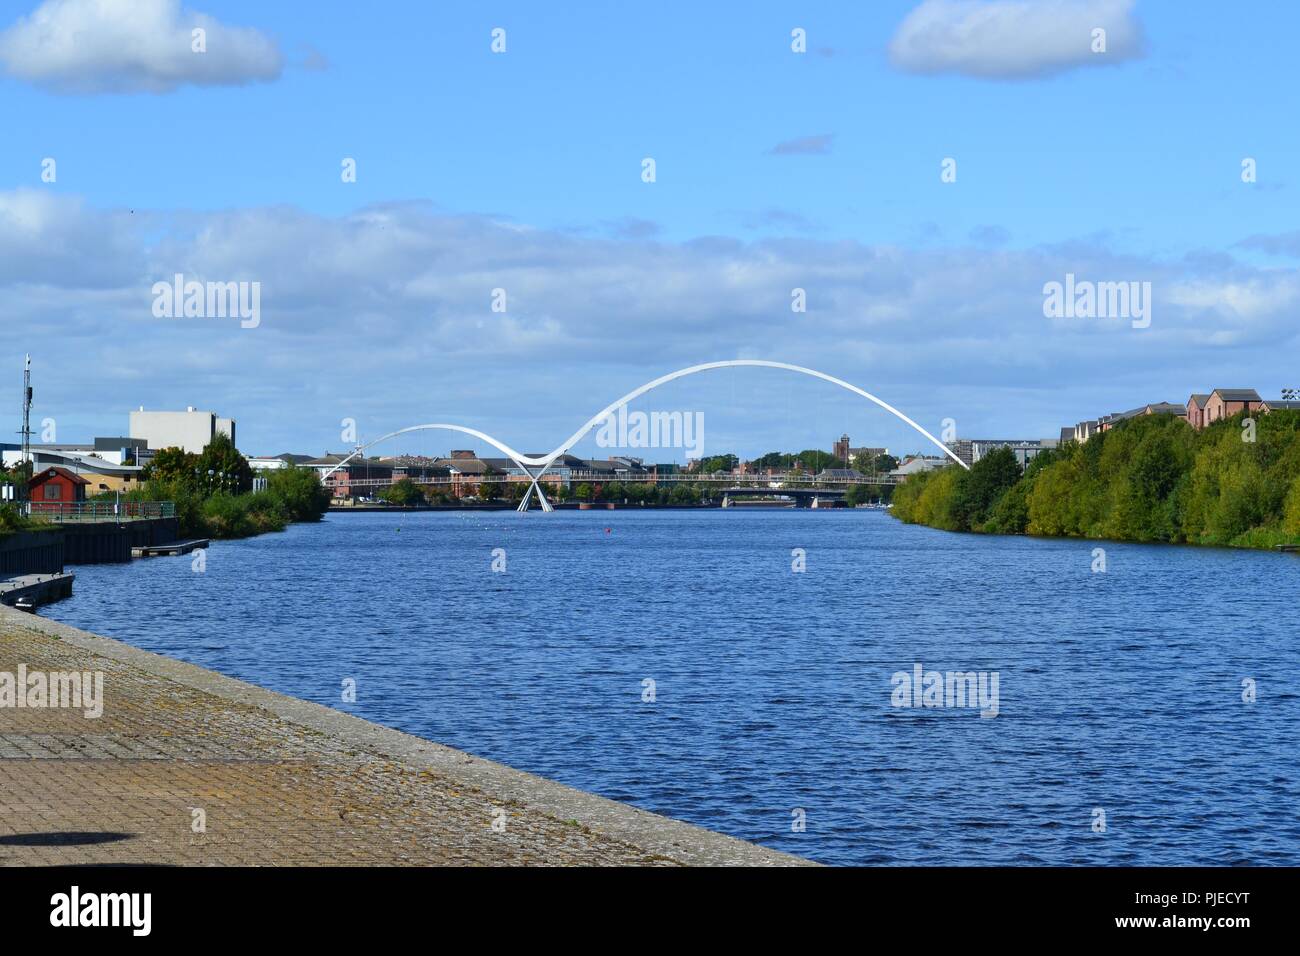 Striking, naturally lit image of the iconic Infinity Bridge spanning the River Tees in Stockton-on-Tees, UK Stock Photo